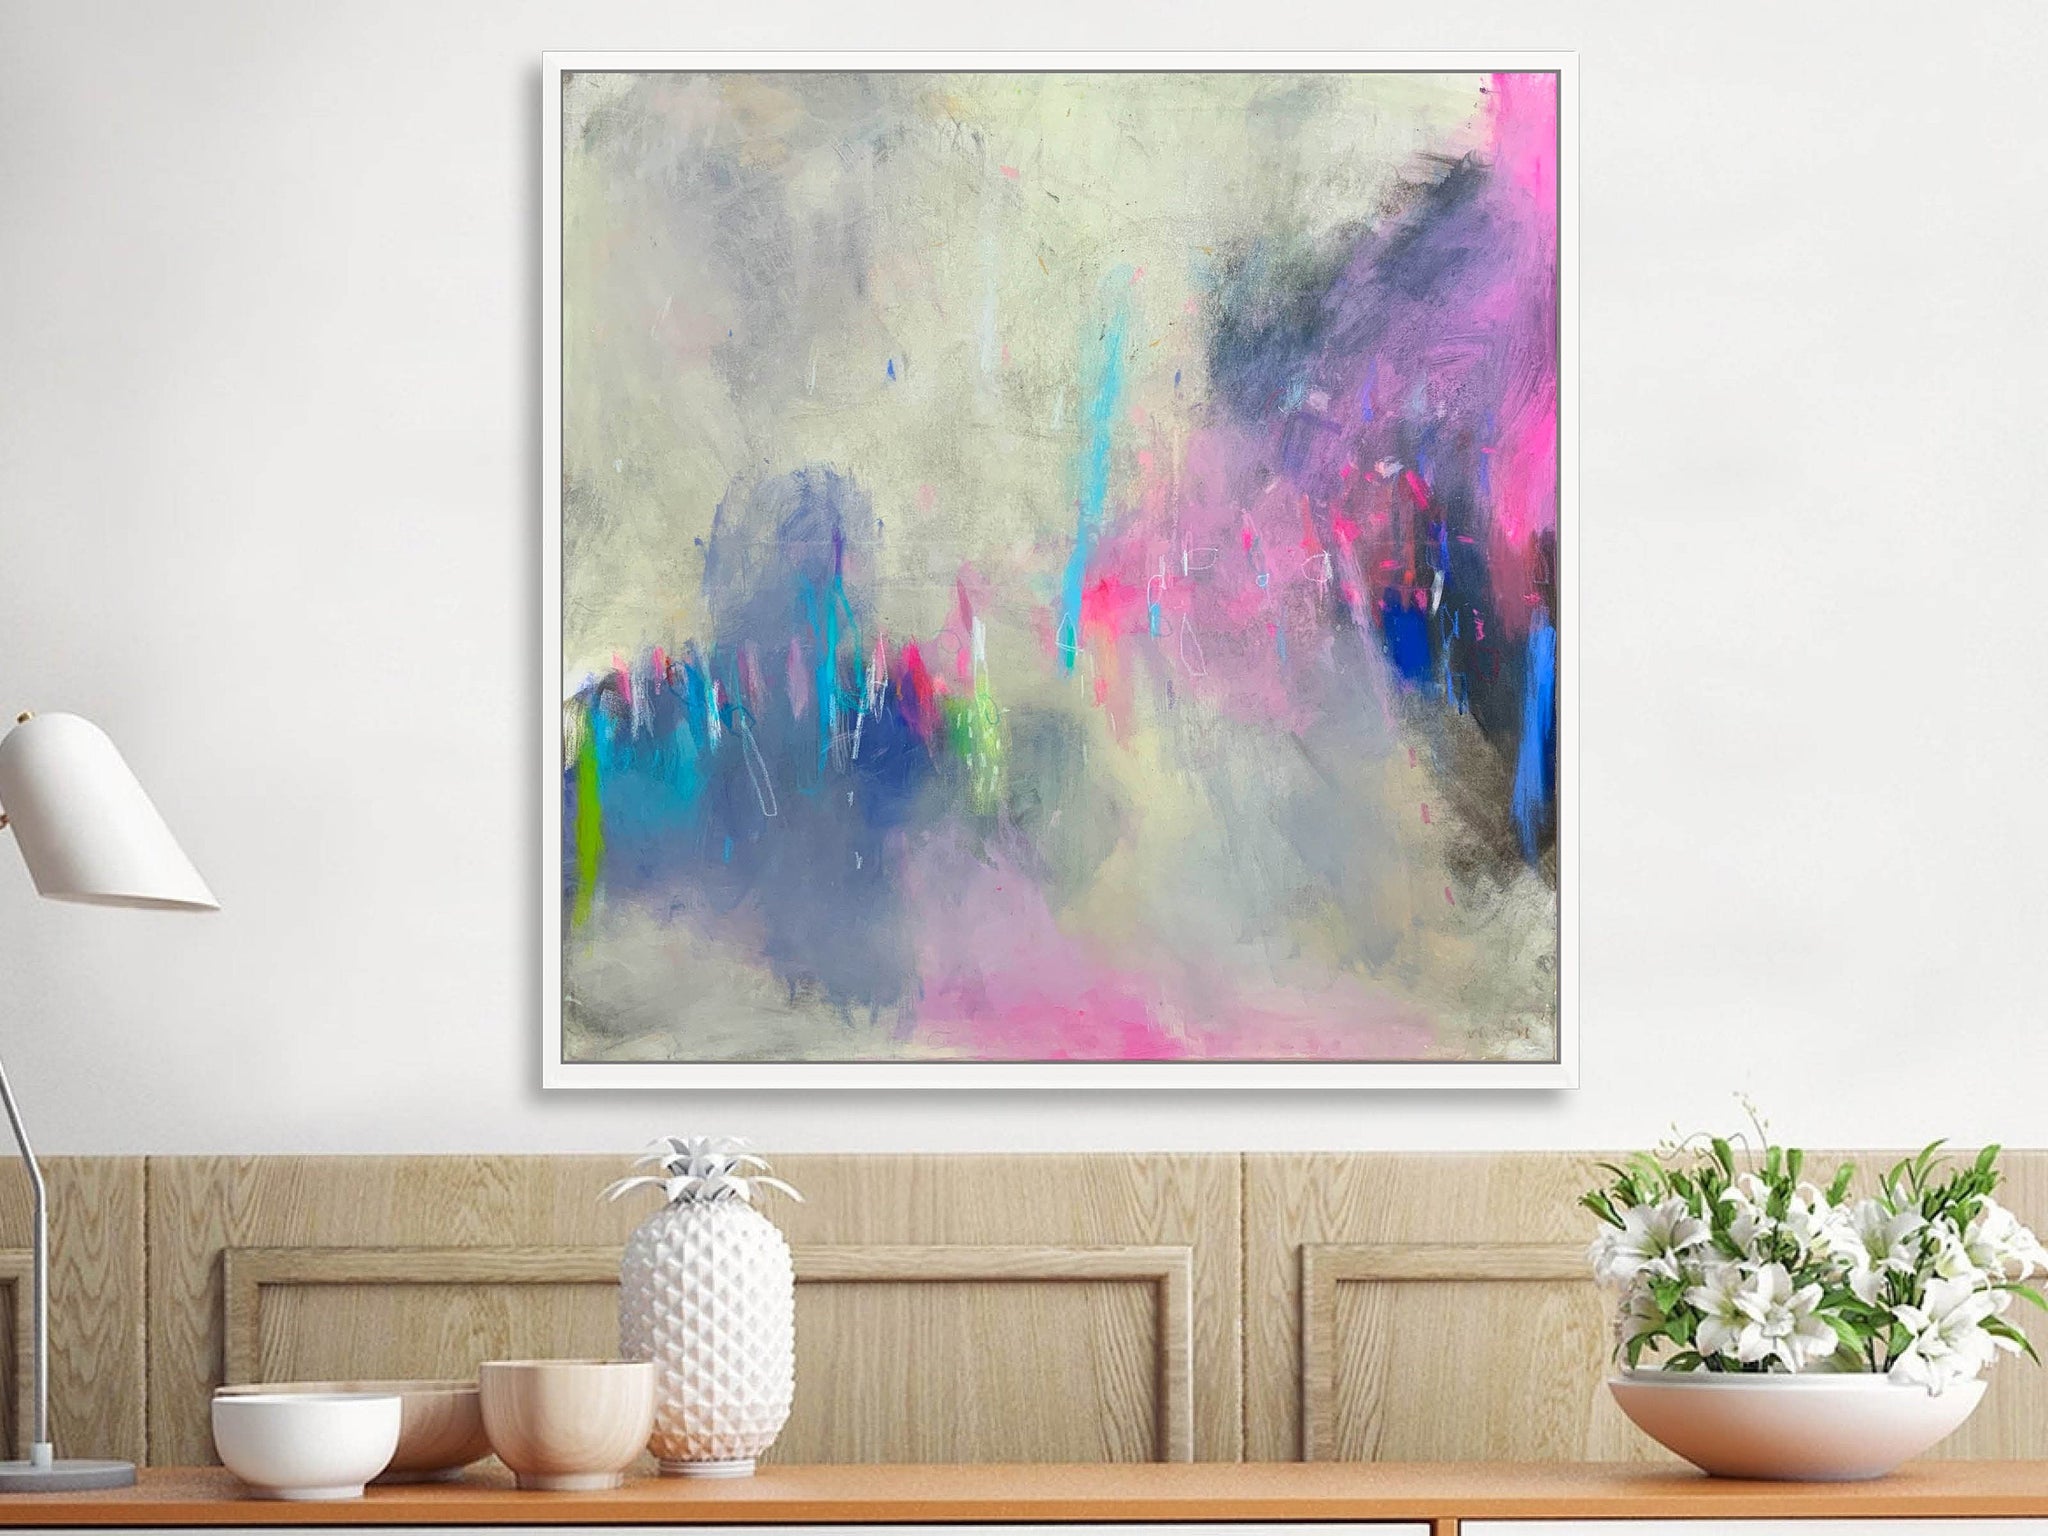 Extra large wall art, Teal wall art abstract painting, gallery wall, large wall art, wall art canvas, Teal abstract, Landscape painting - camilomattis.com